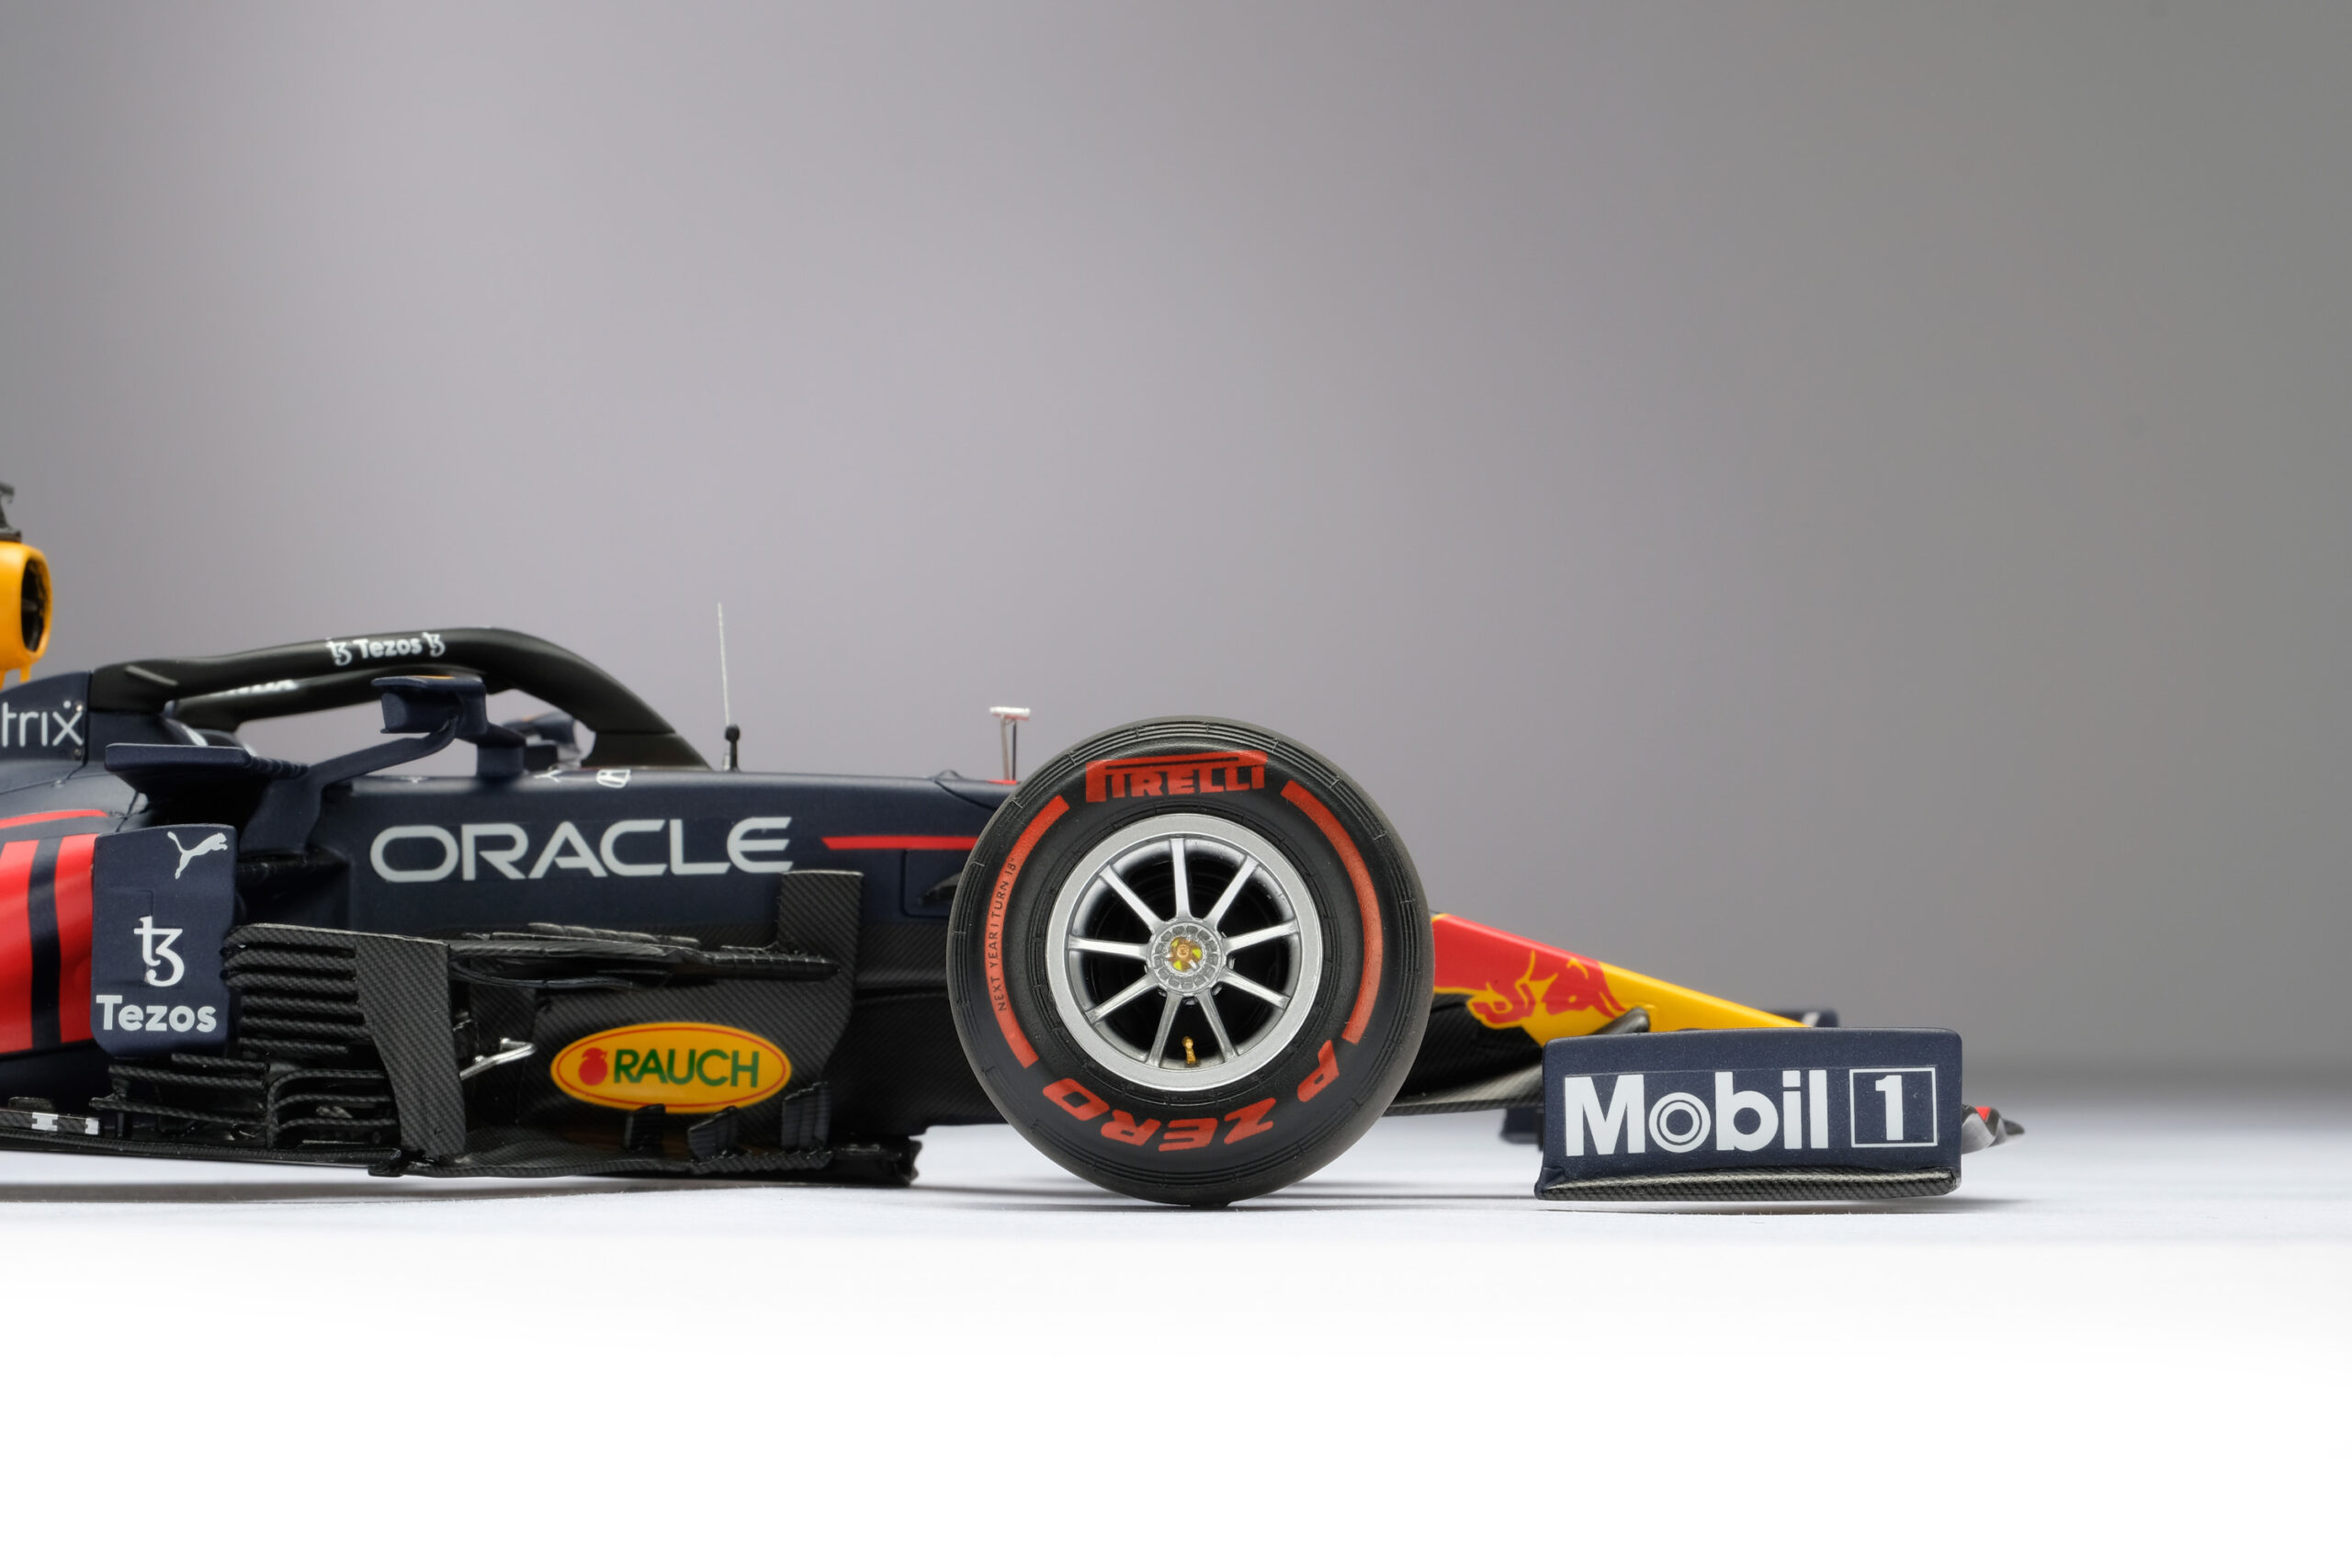 Red Bull reveal RB16B F1 car set to be piloted by Verstappen and Perez in  2021